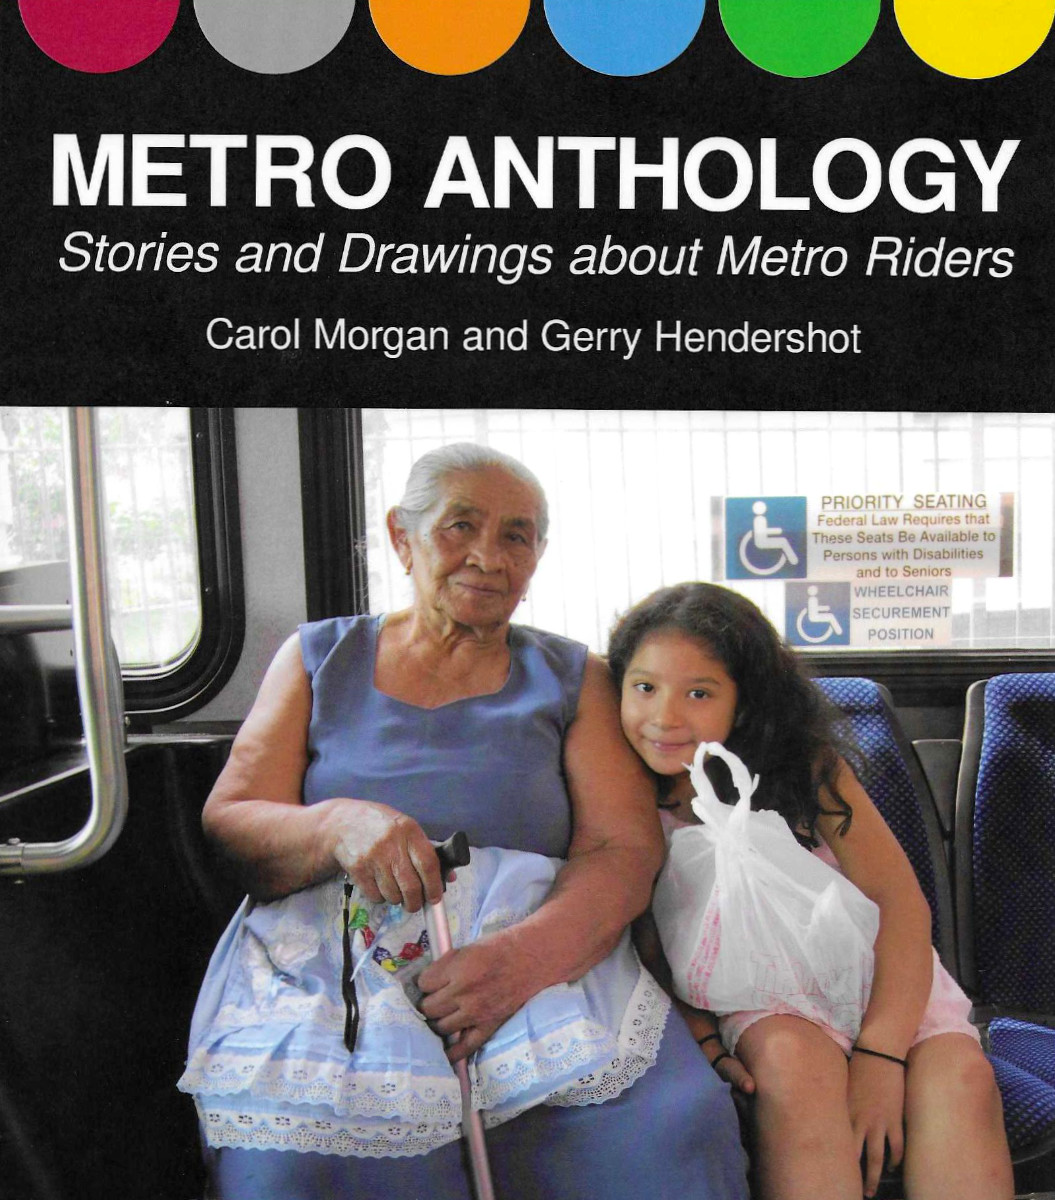 The cover of a book. Metro Anthology: Stories and Drawings about Metro Riders by Carol Morgan and Gerry Hendershot.